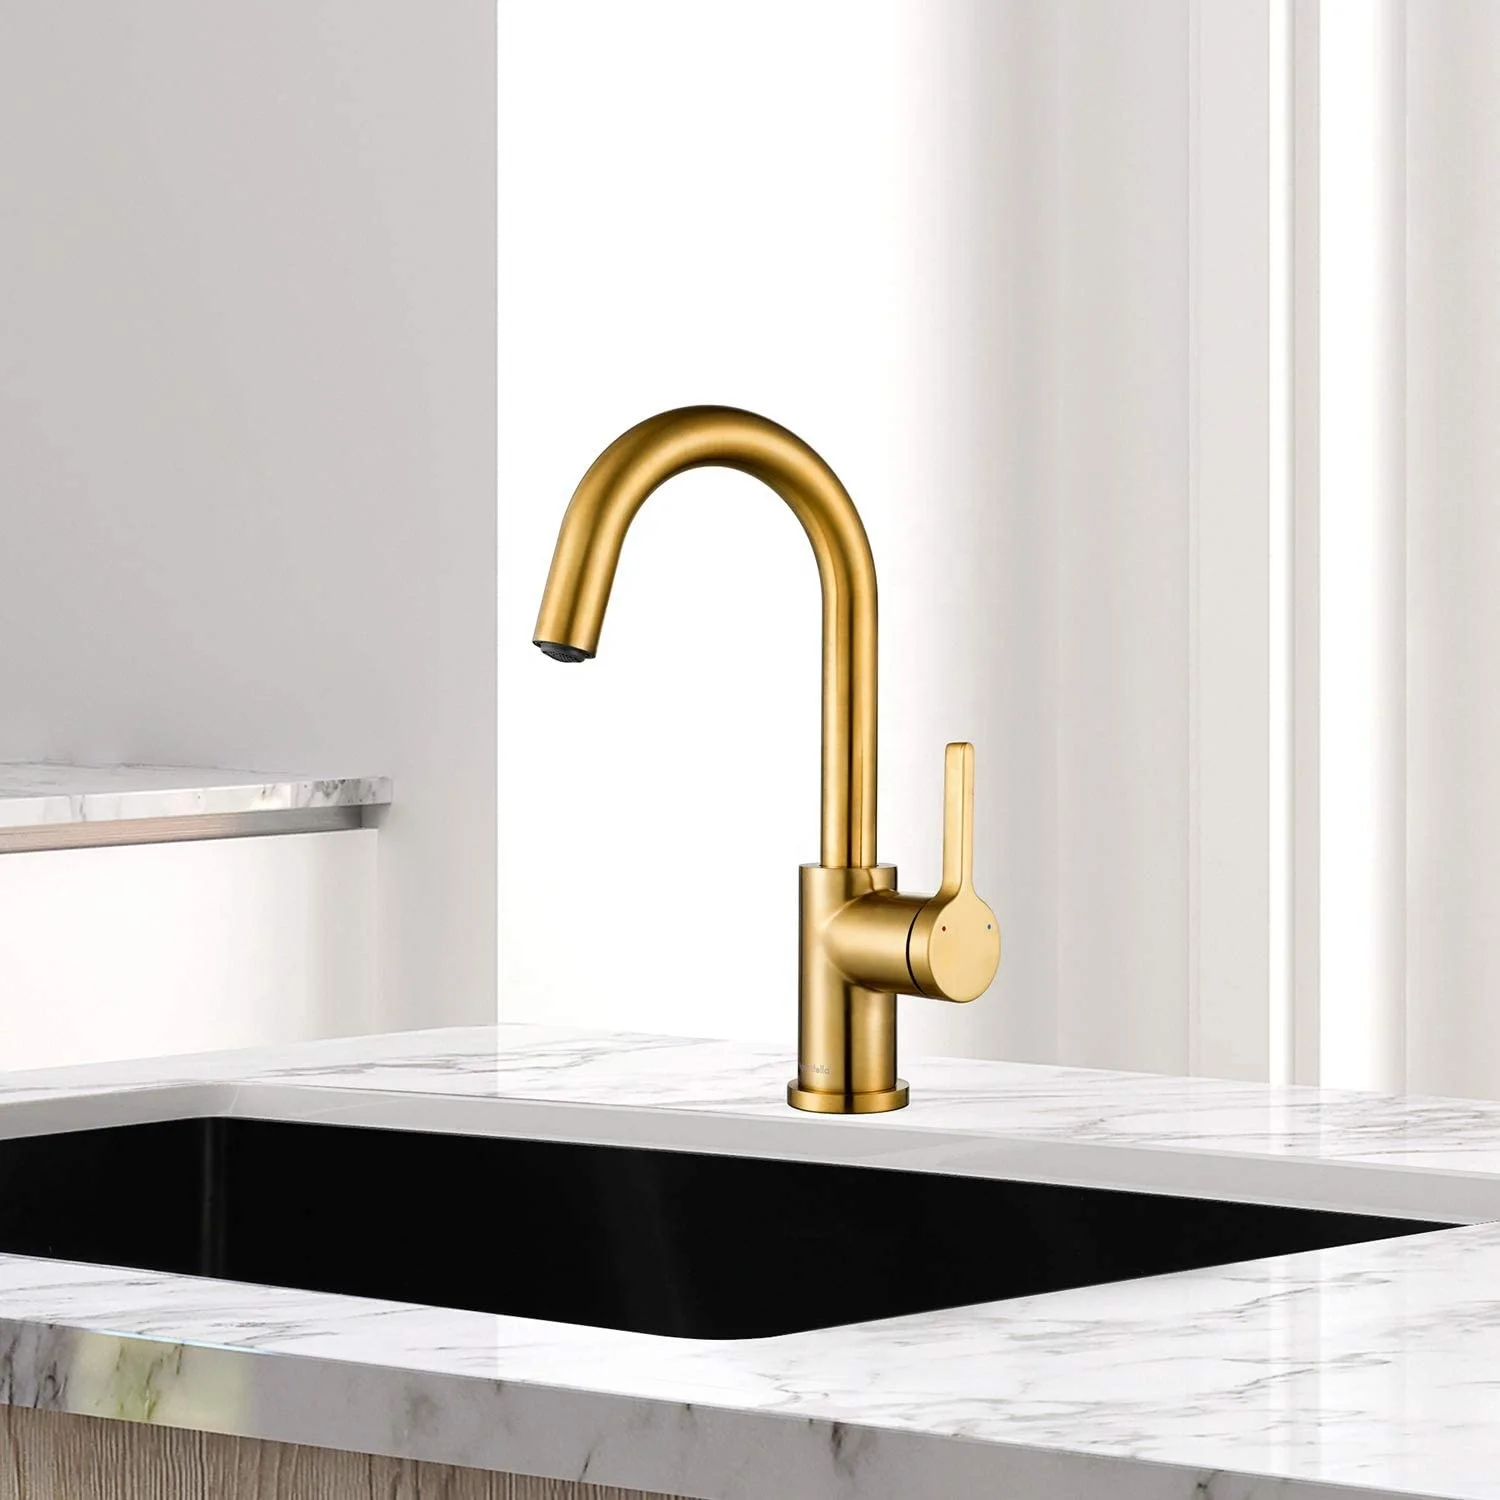 Gold Kitchen Faucet, 360 Degree Swivel Hot and Cold Mixer Brushed Gold Single Handle Sink Faucet